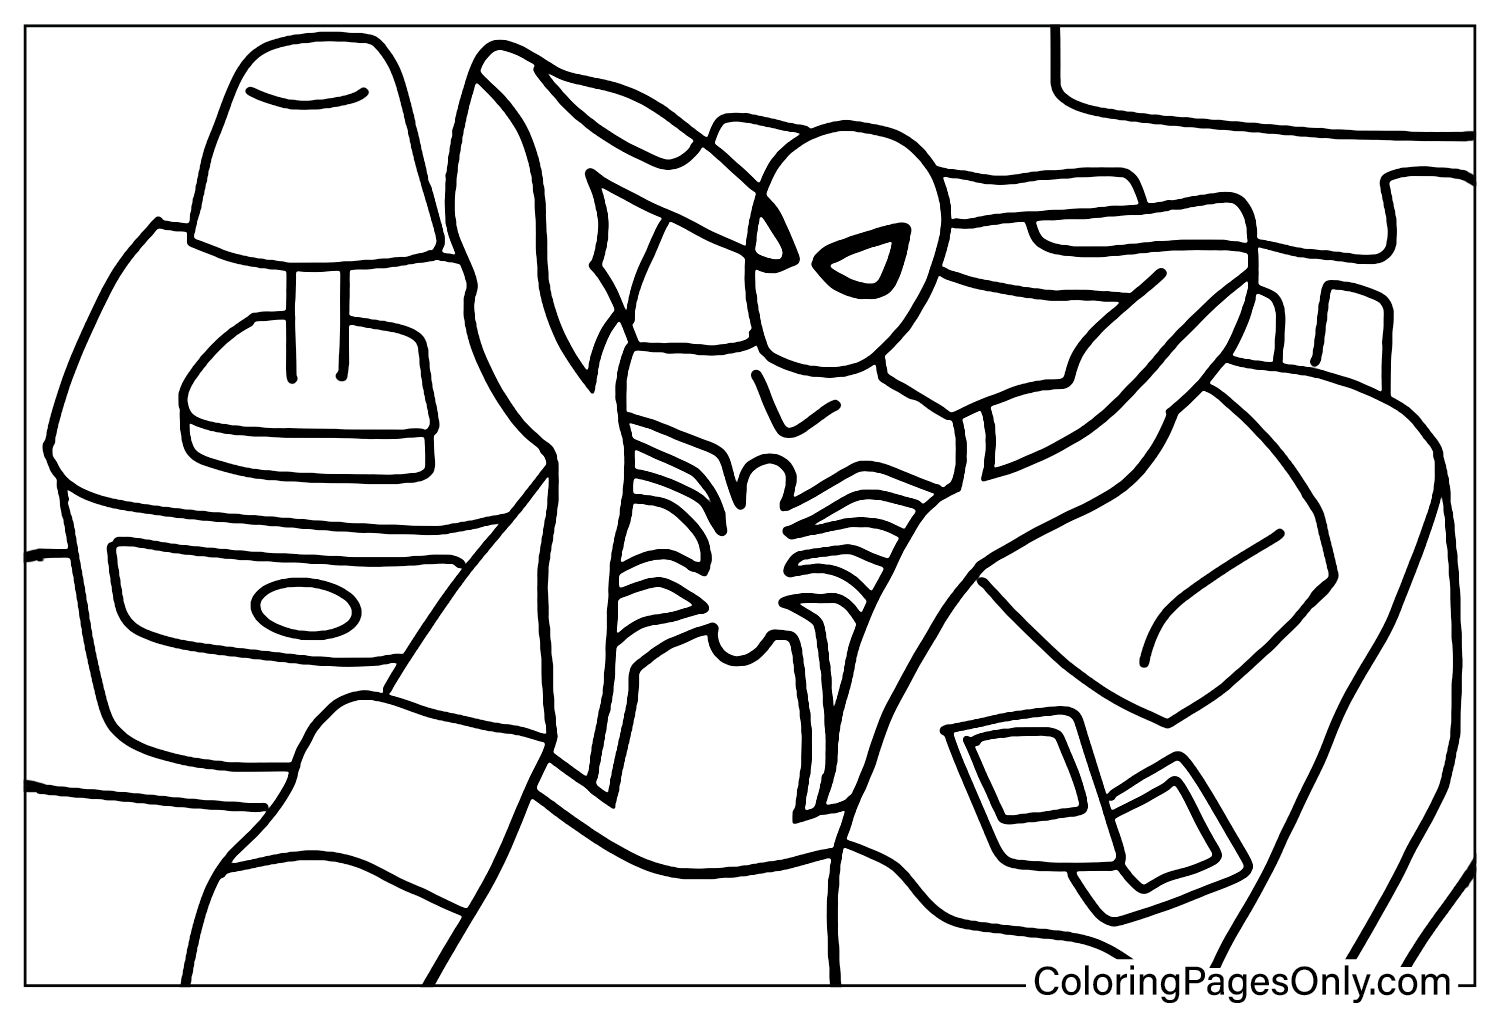 Spider-Man Far From Home Coloring for Kids from Spider-Man Far From Home